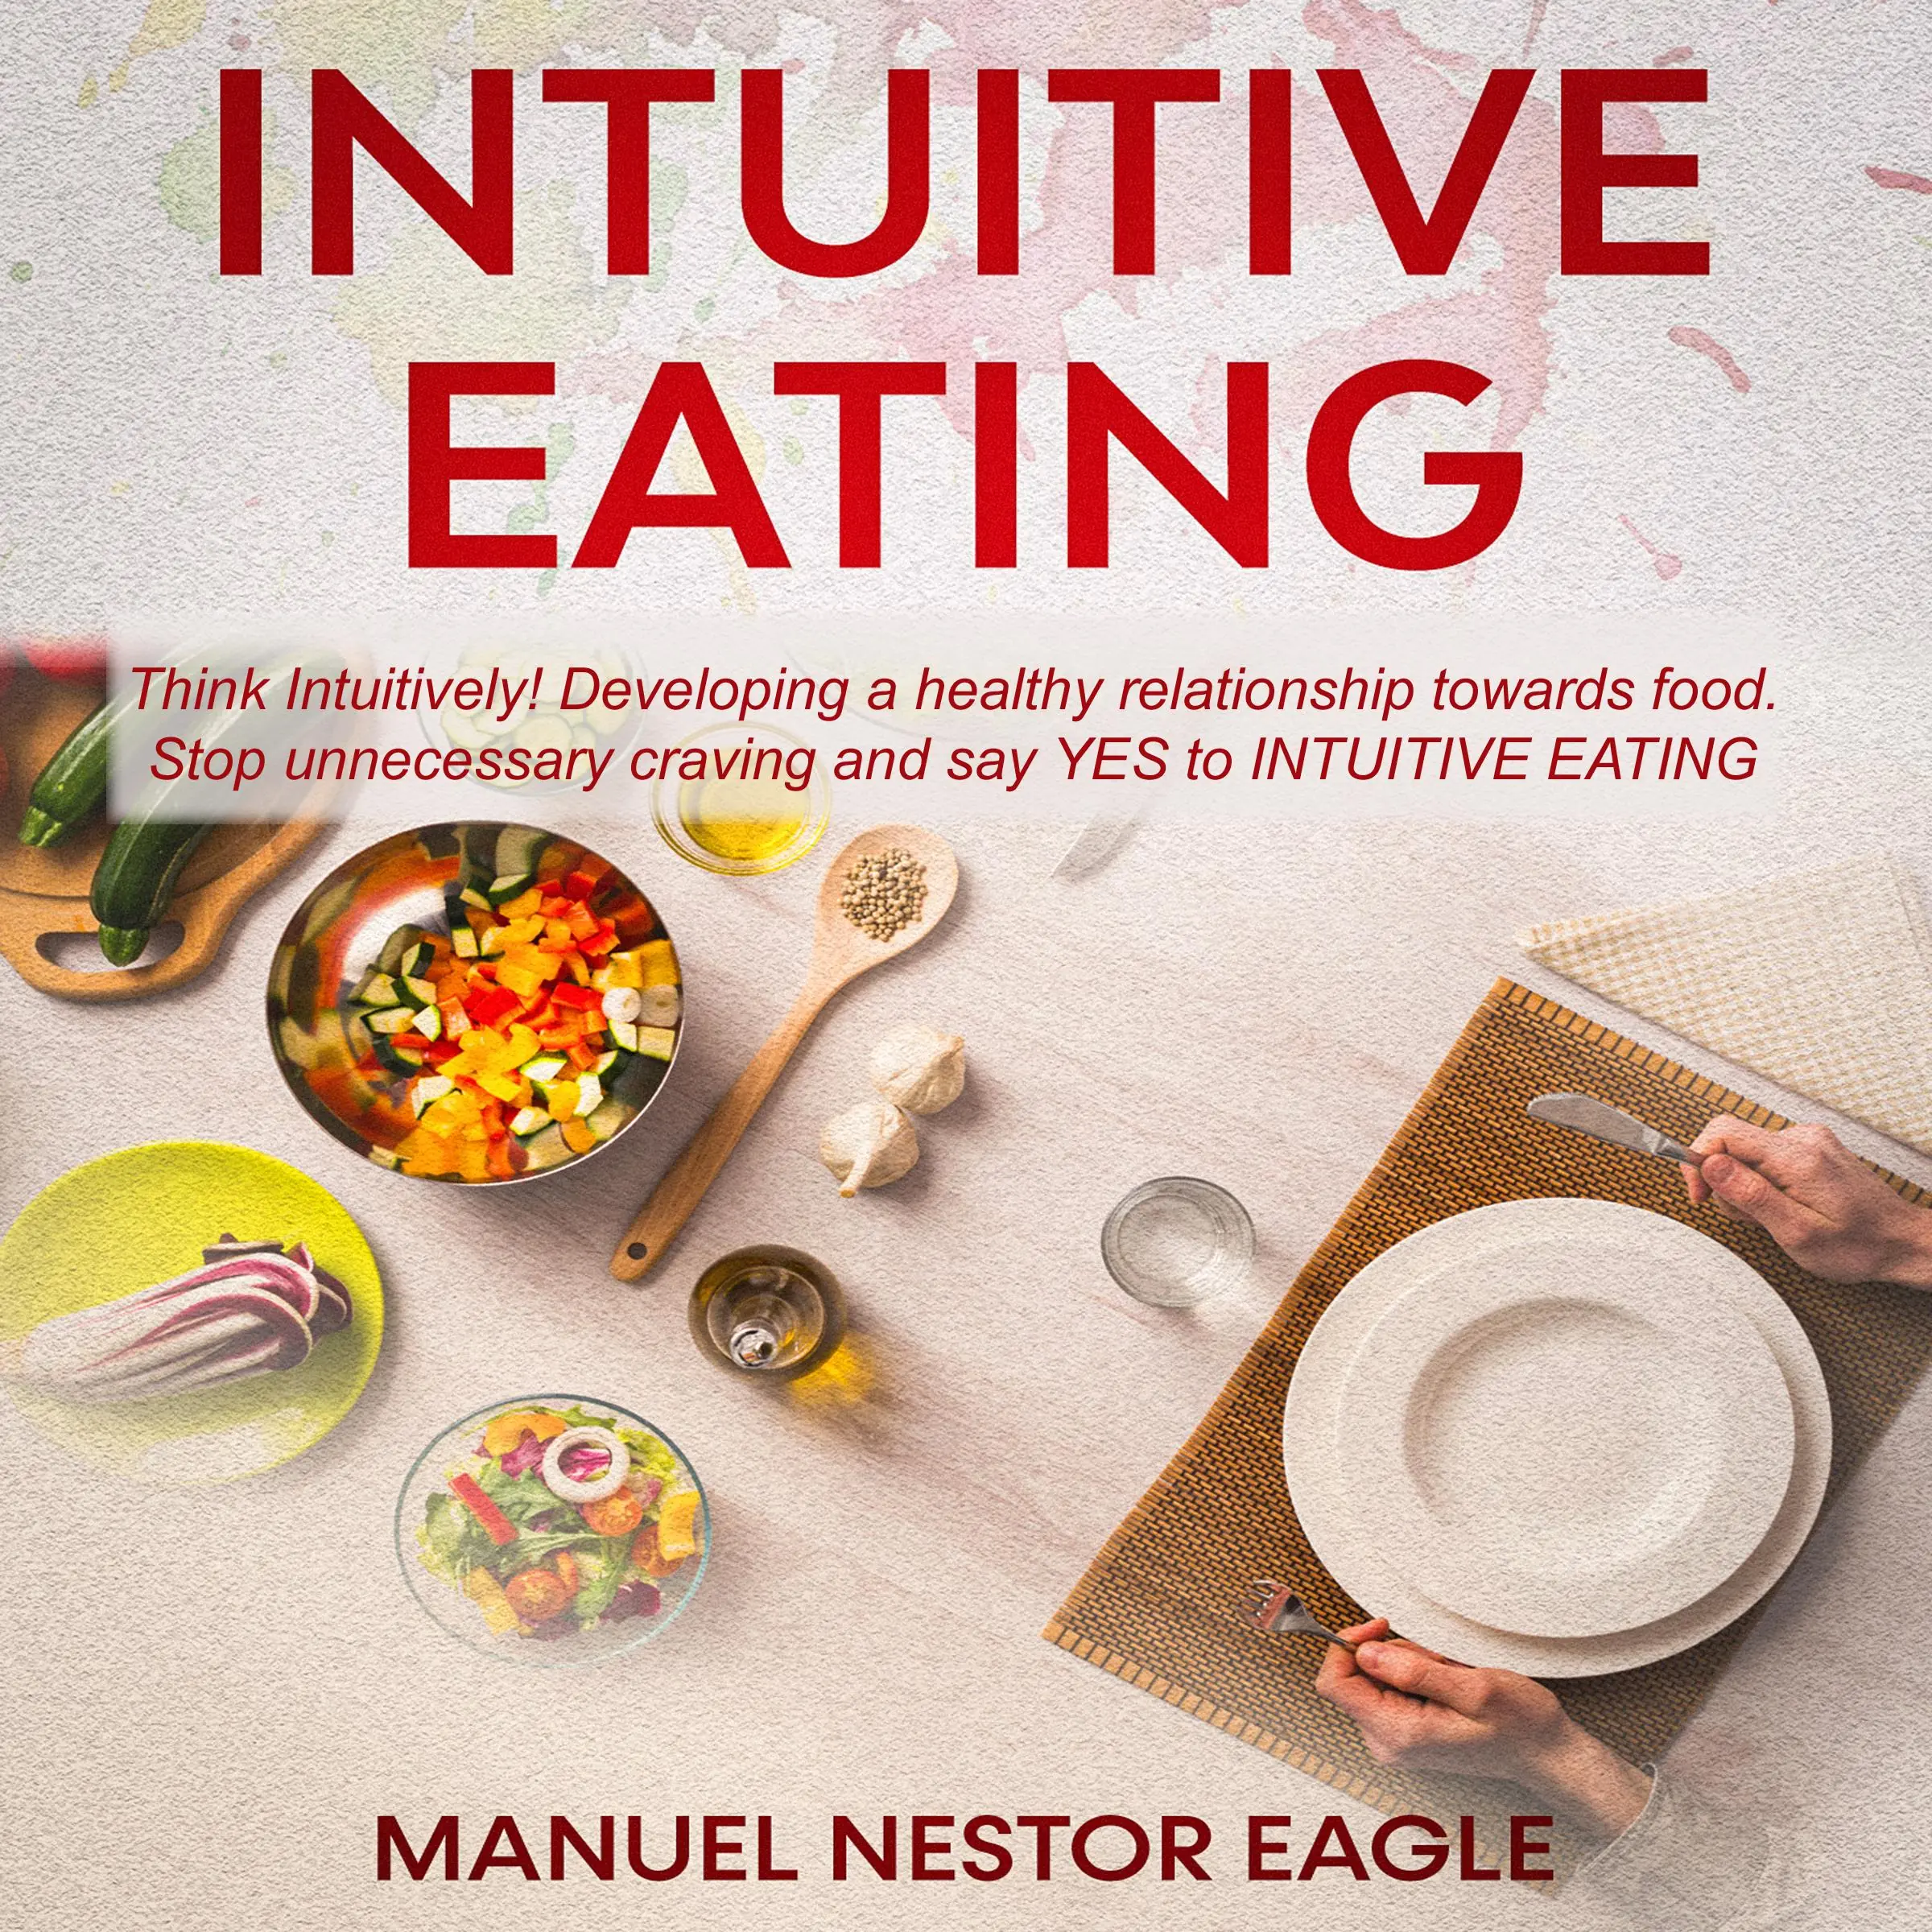 Intuitive Eating: Think Intuitively! Developing a healthy relationship towards food. Stop unnecessary craving and say YES to Intuitive Eating! Audiobook by Manuel Nestor Eagle